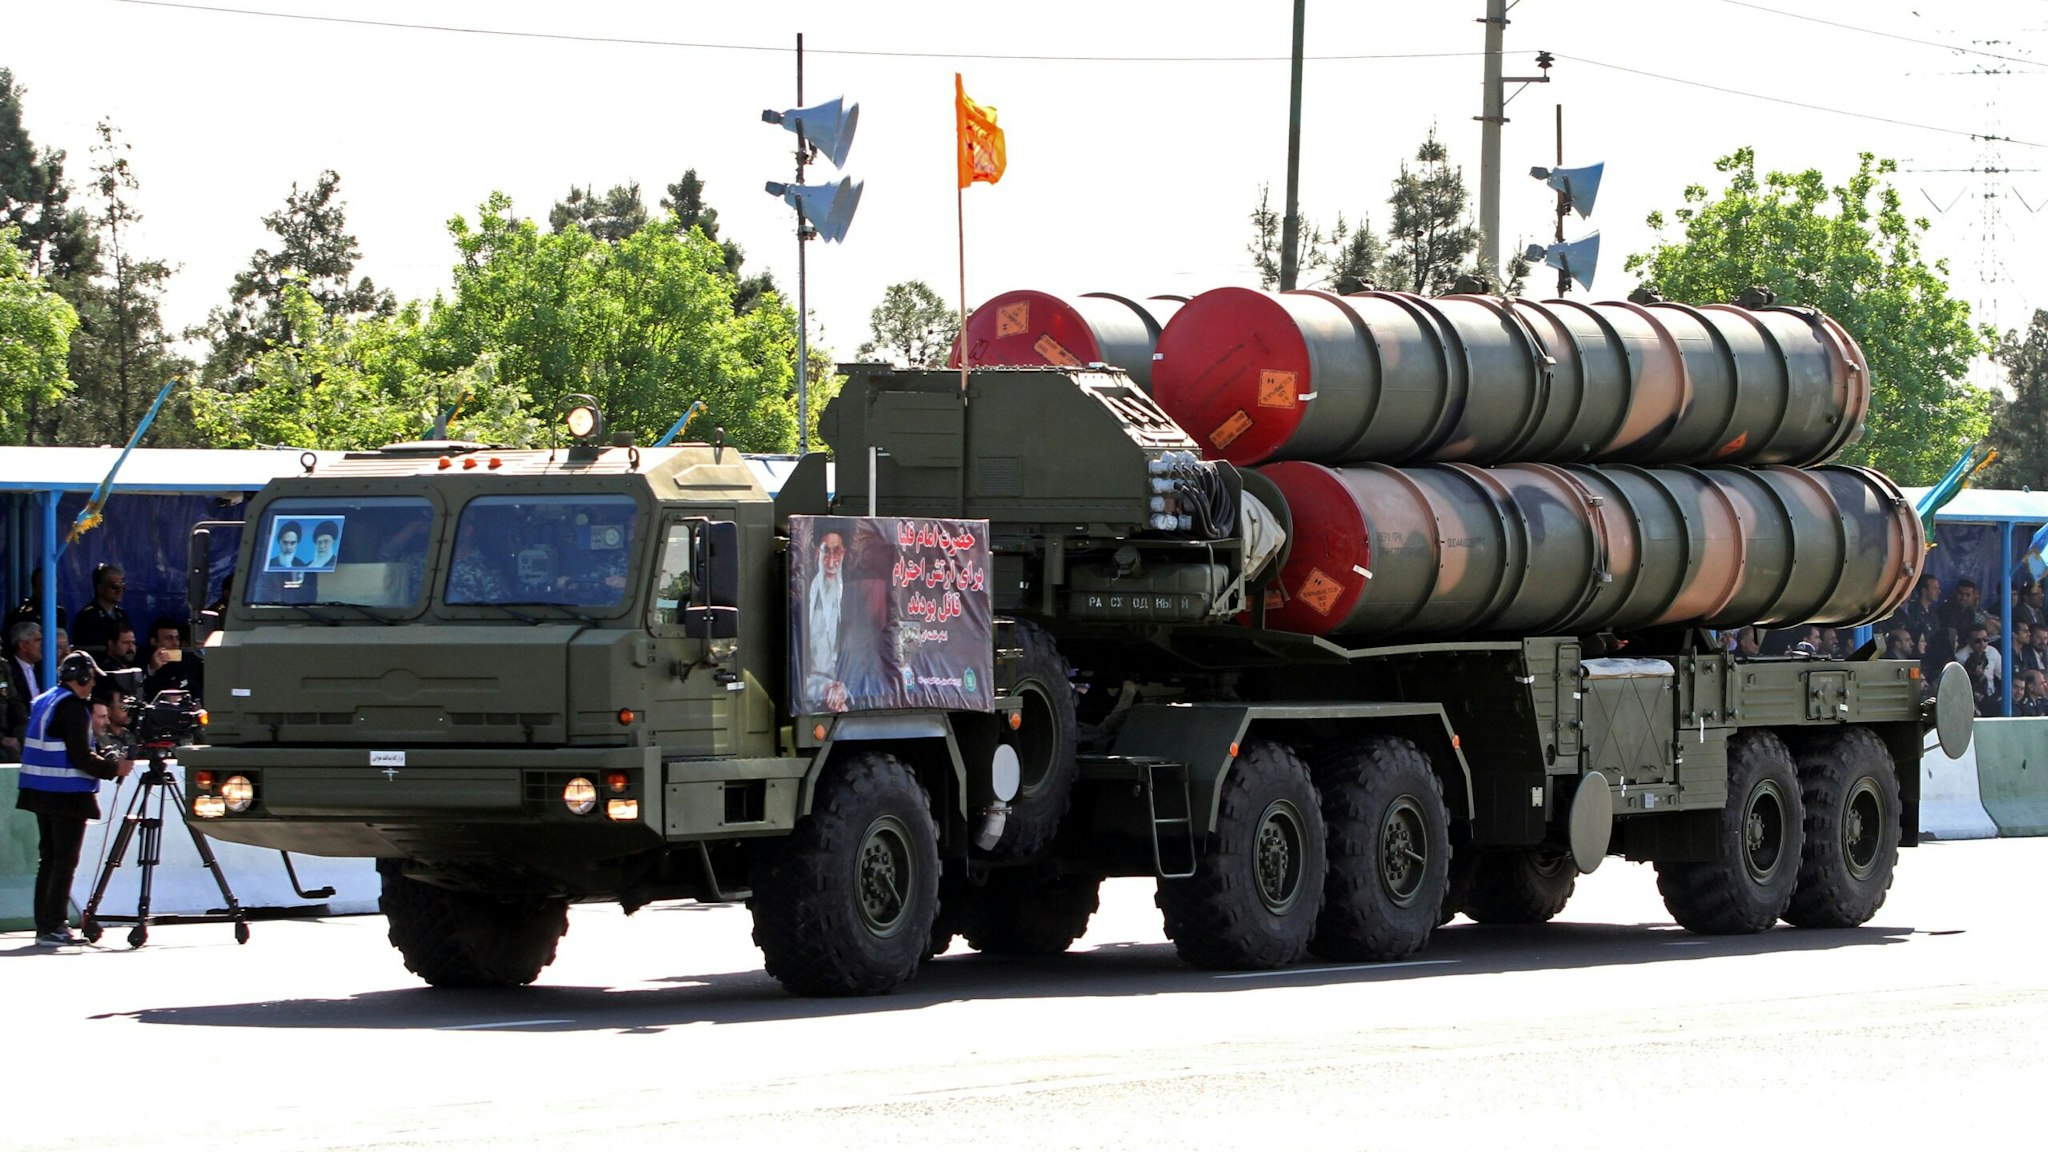 An Iranian military truck carries parts of the S-300 air defence missile system during a parade on the occasion of the country's Army Day, on April 18, 2017, in Tehran.